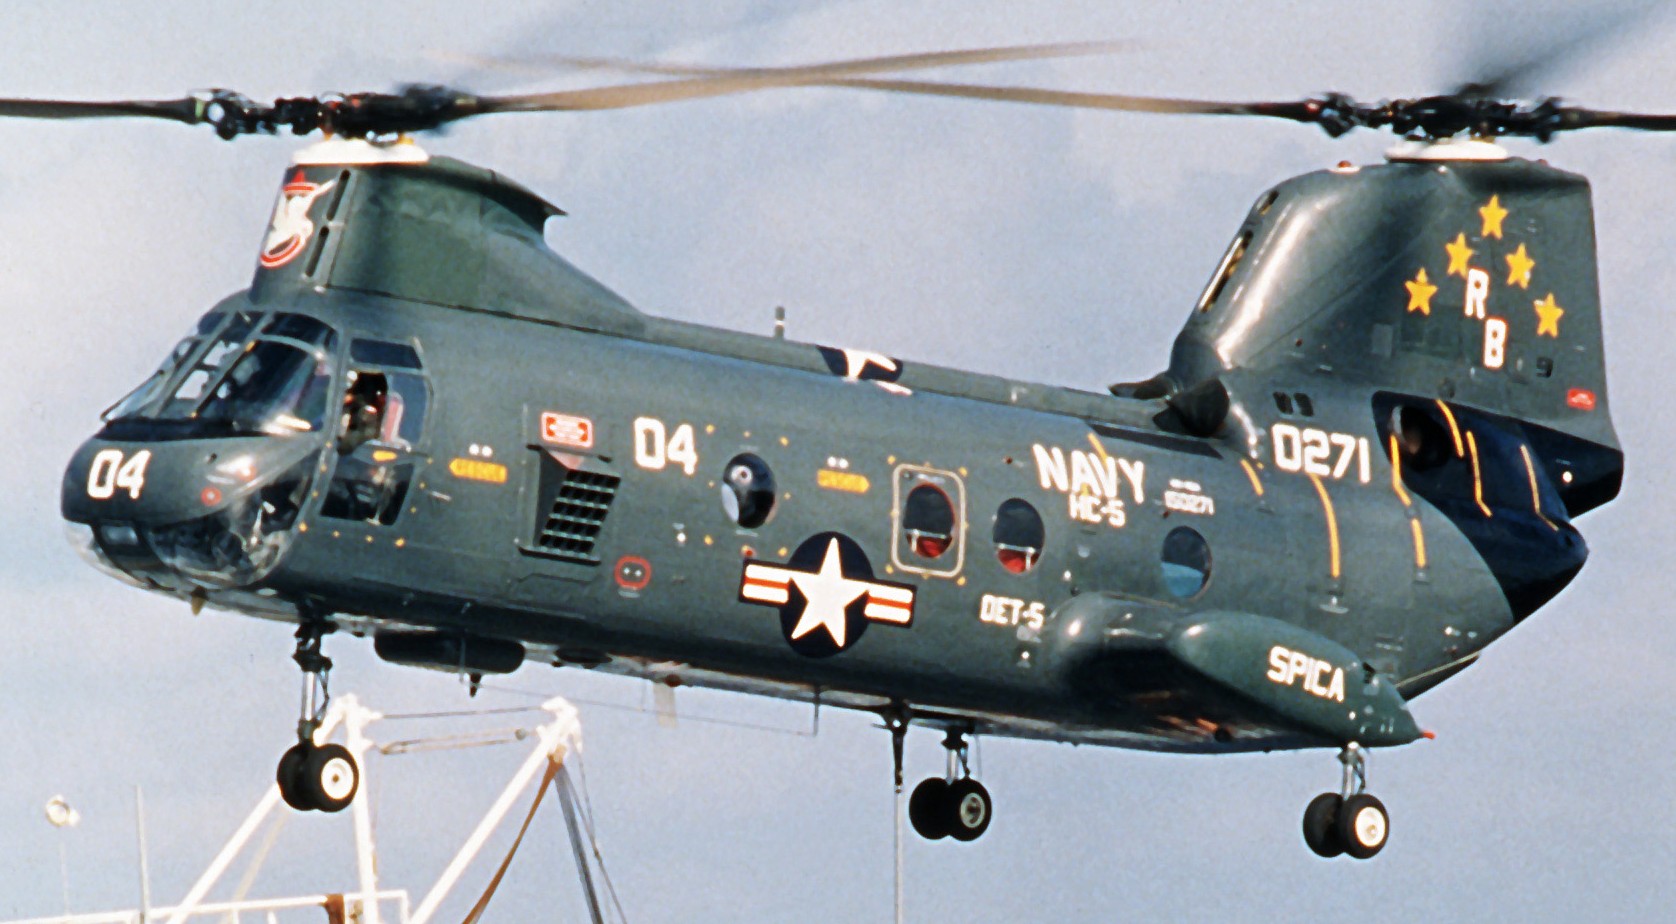 hc-5 providers helicopter combat support squadron navy hh-46a sea knight 68